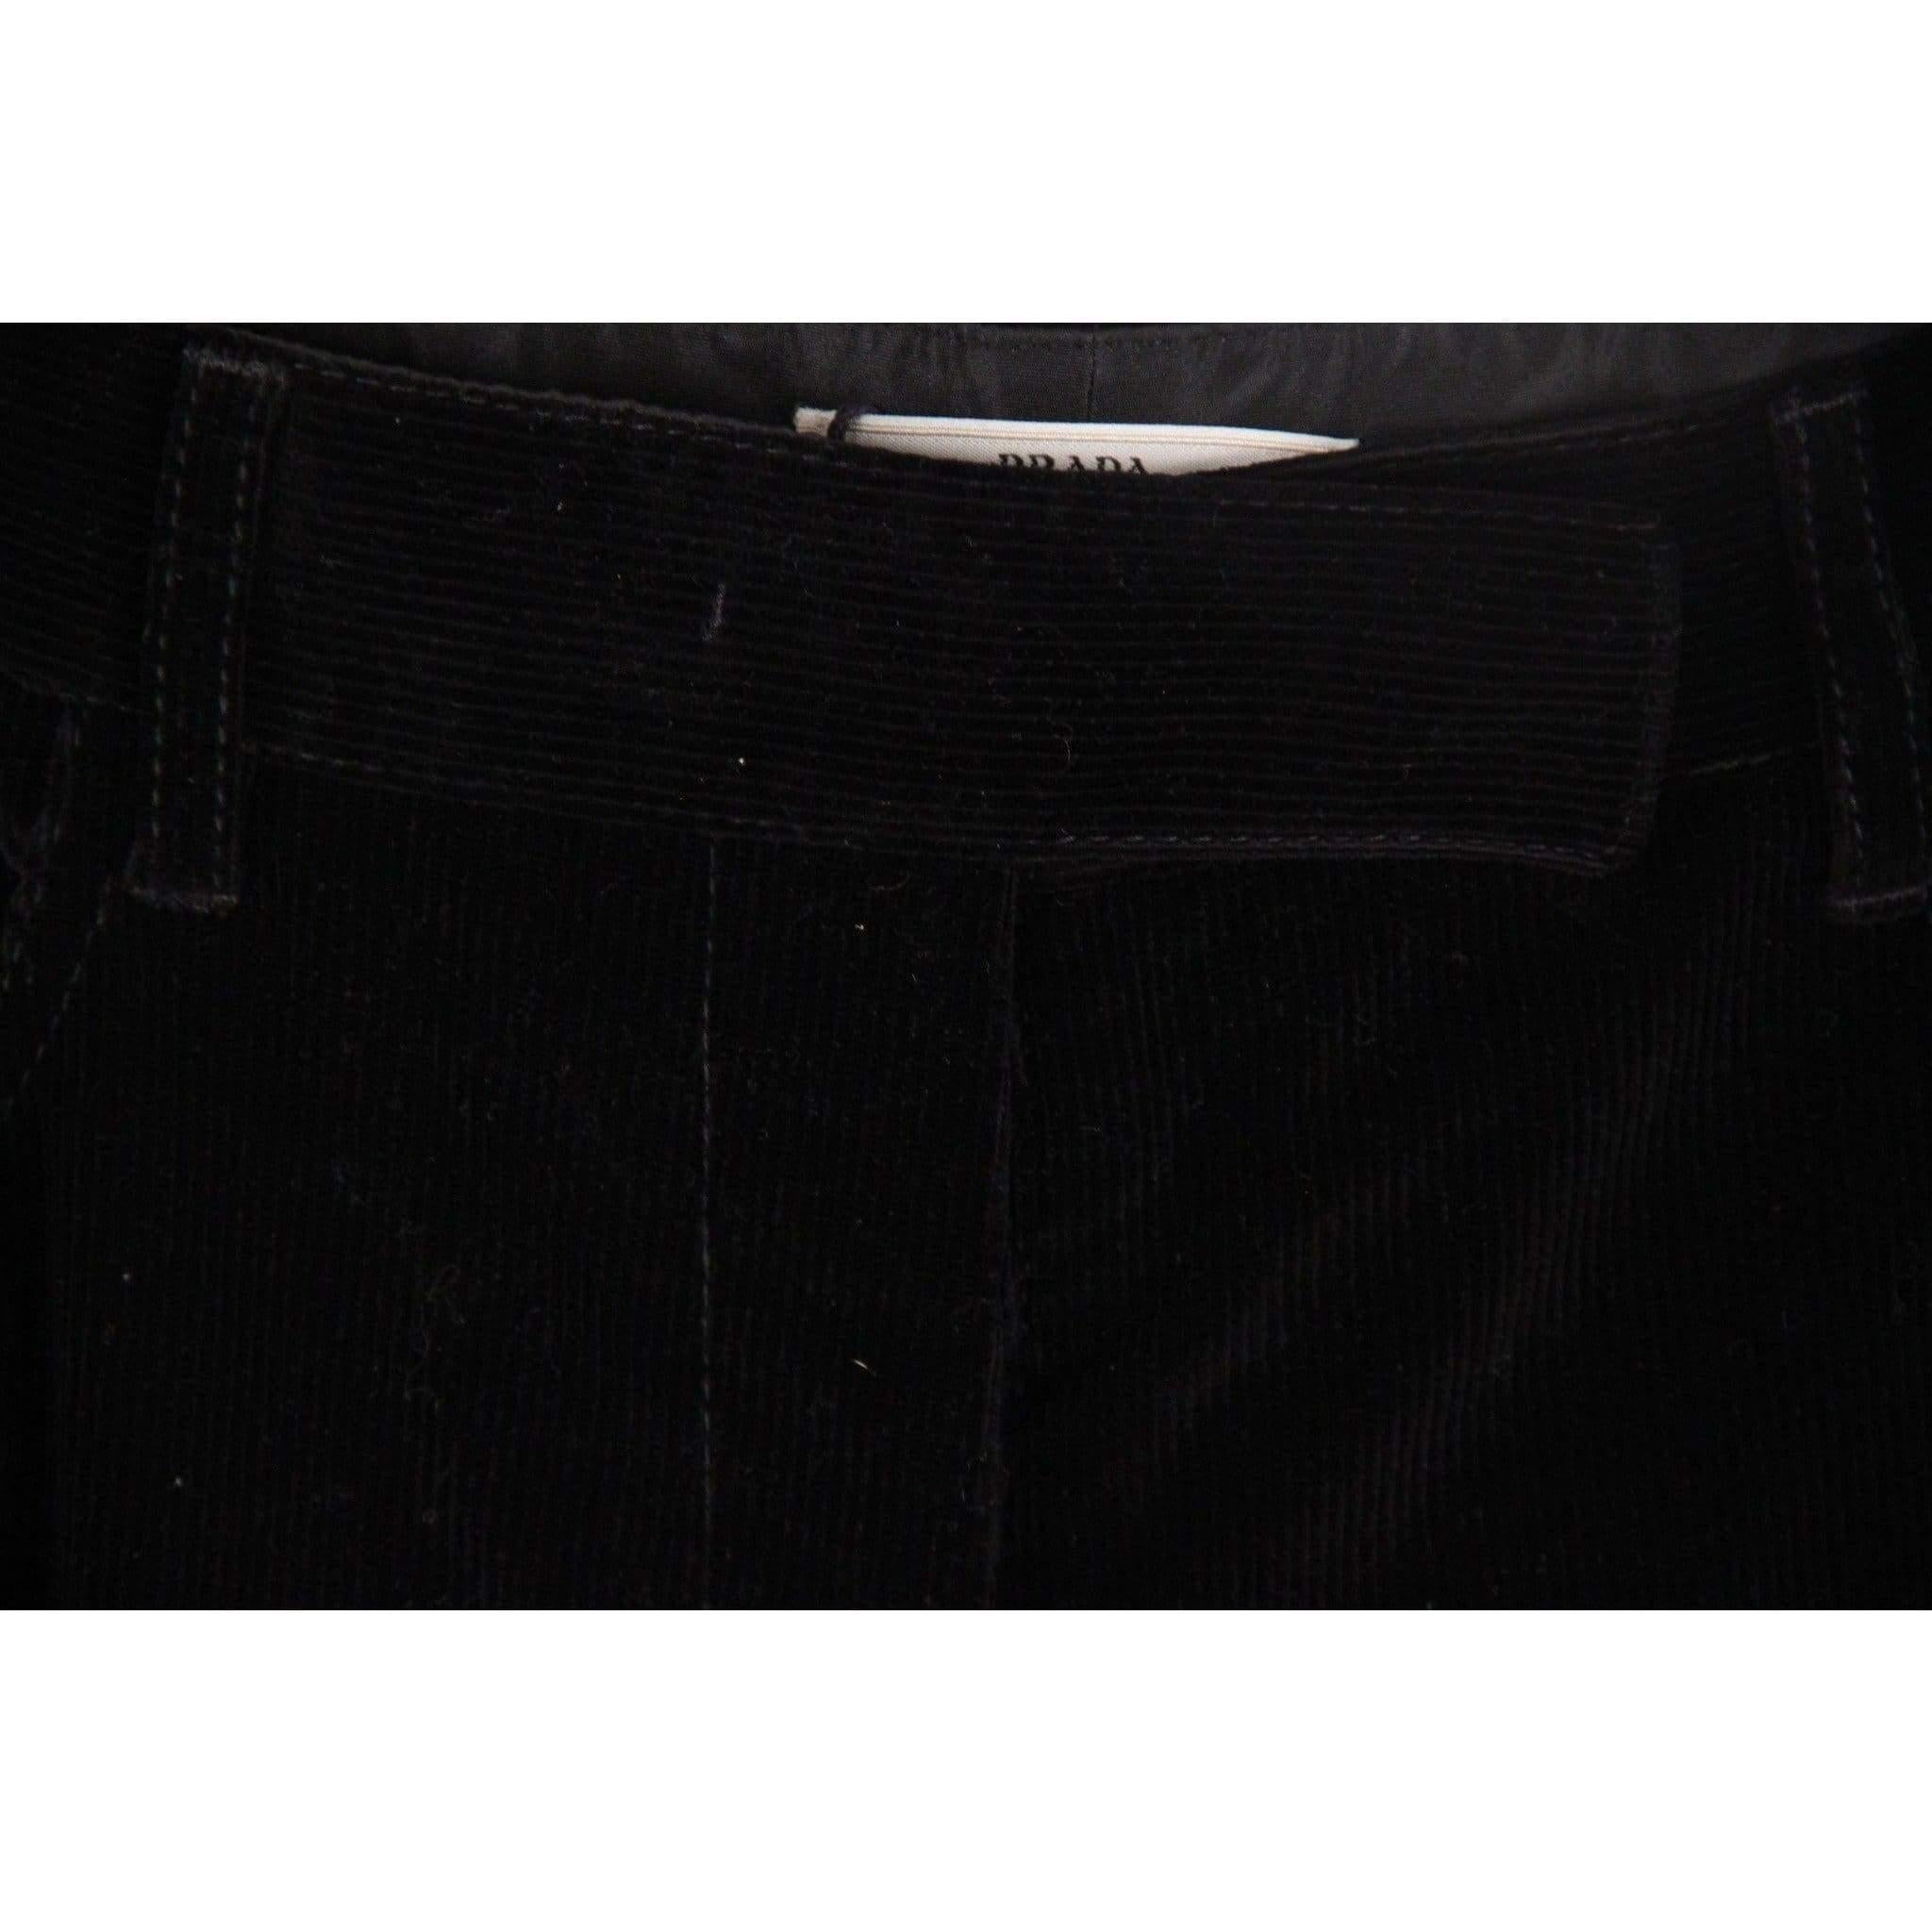 PRADA Black Corduroy 5 POCKET Style PANTS Trousers SIZE 40 In Excellent Condition In Rome, Rome